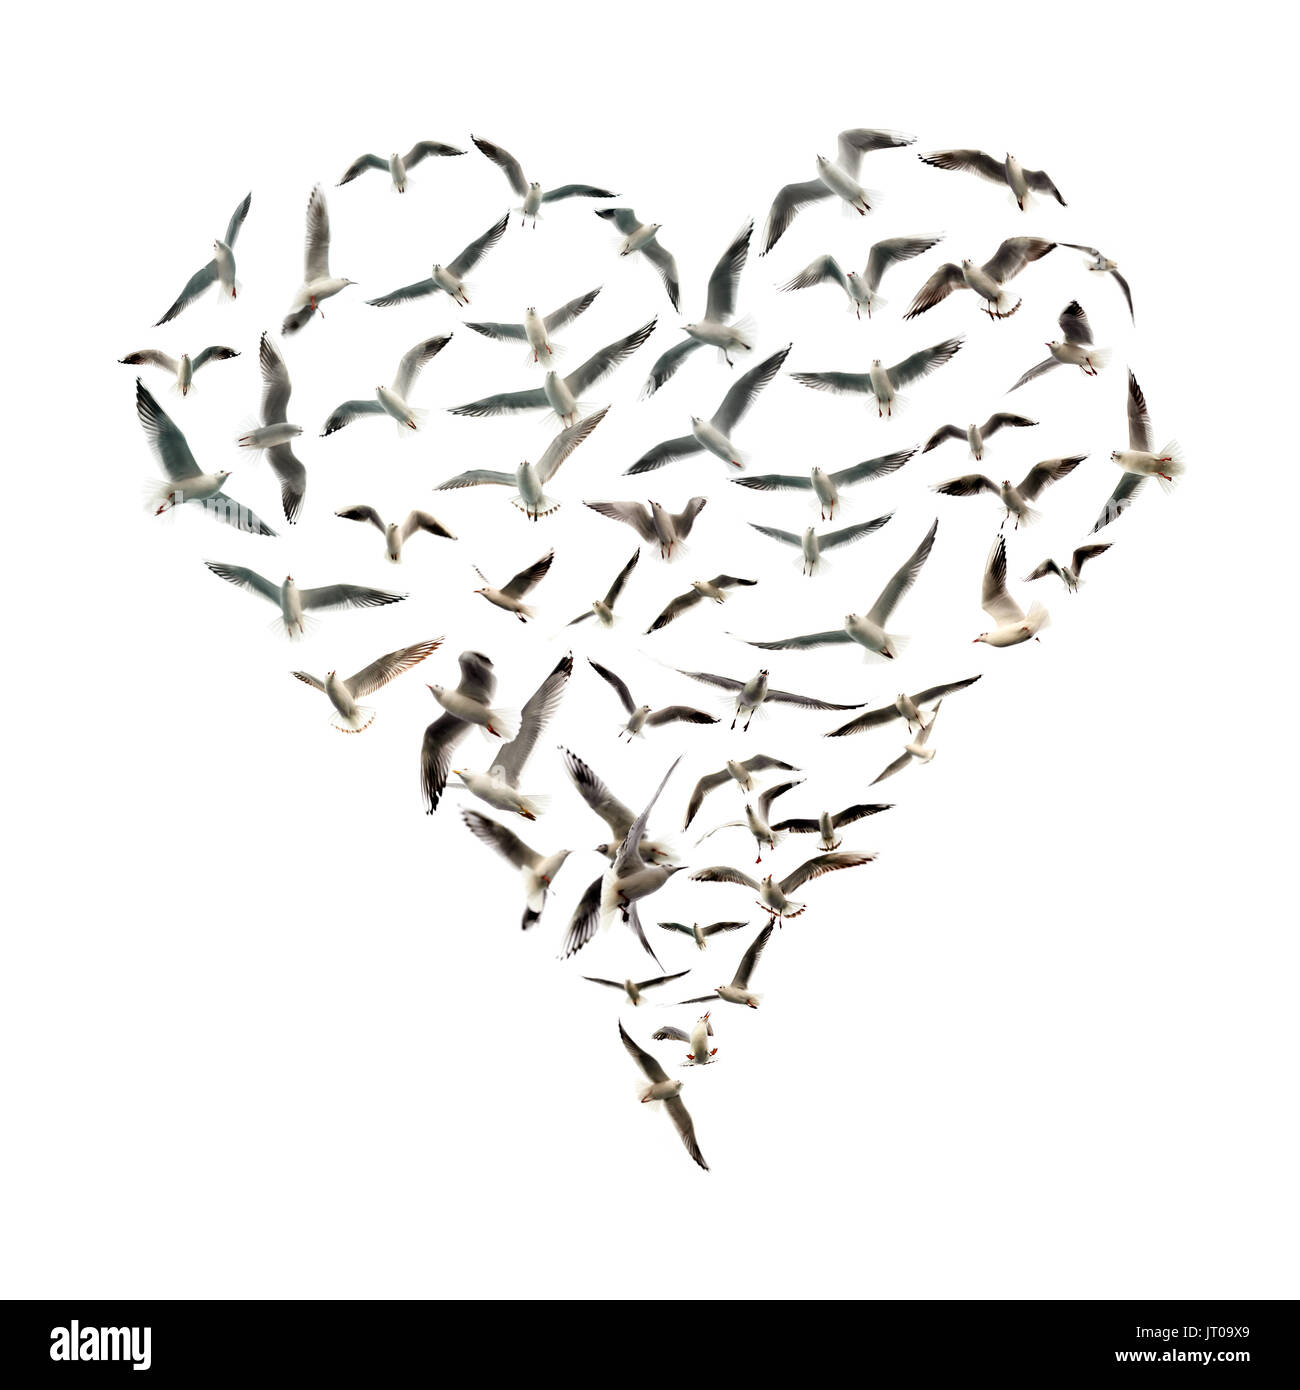 conceptual background image of heart shape with birds flying Stock Photo